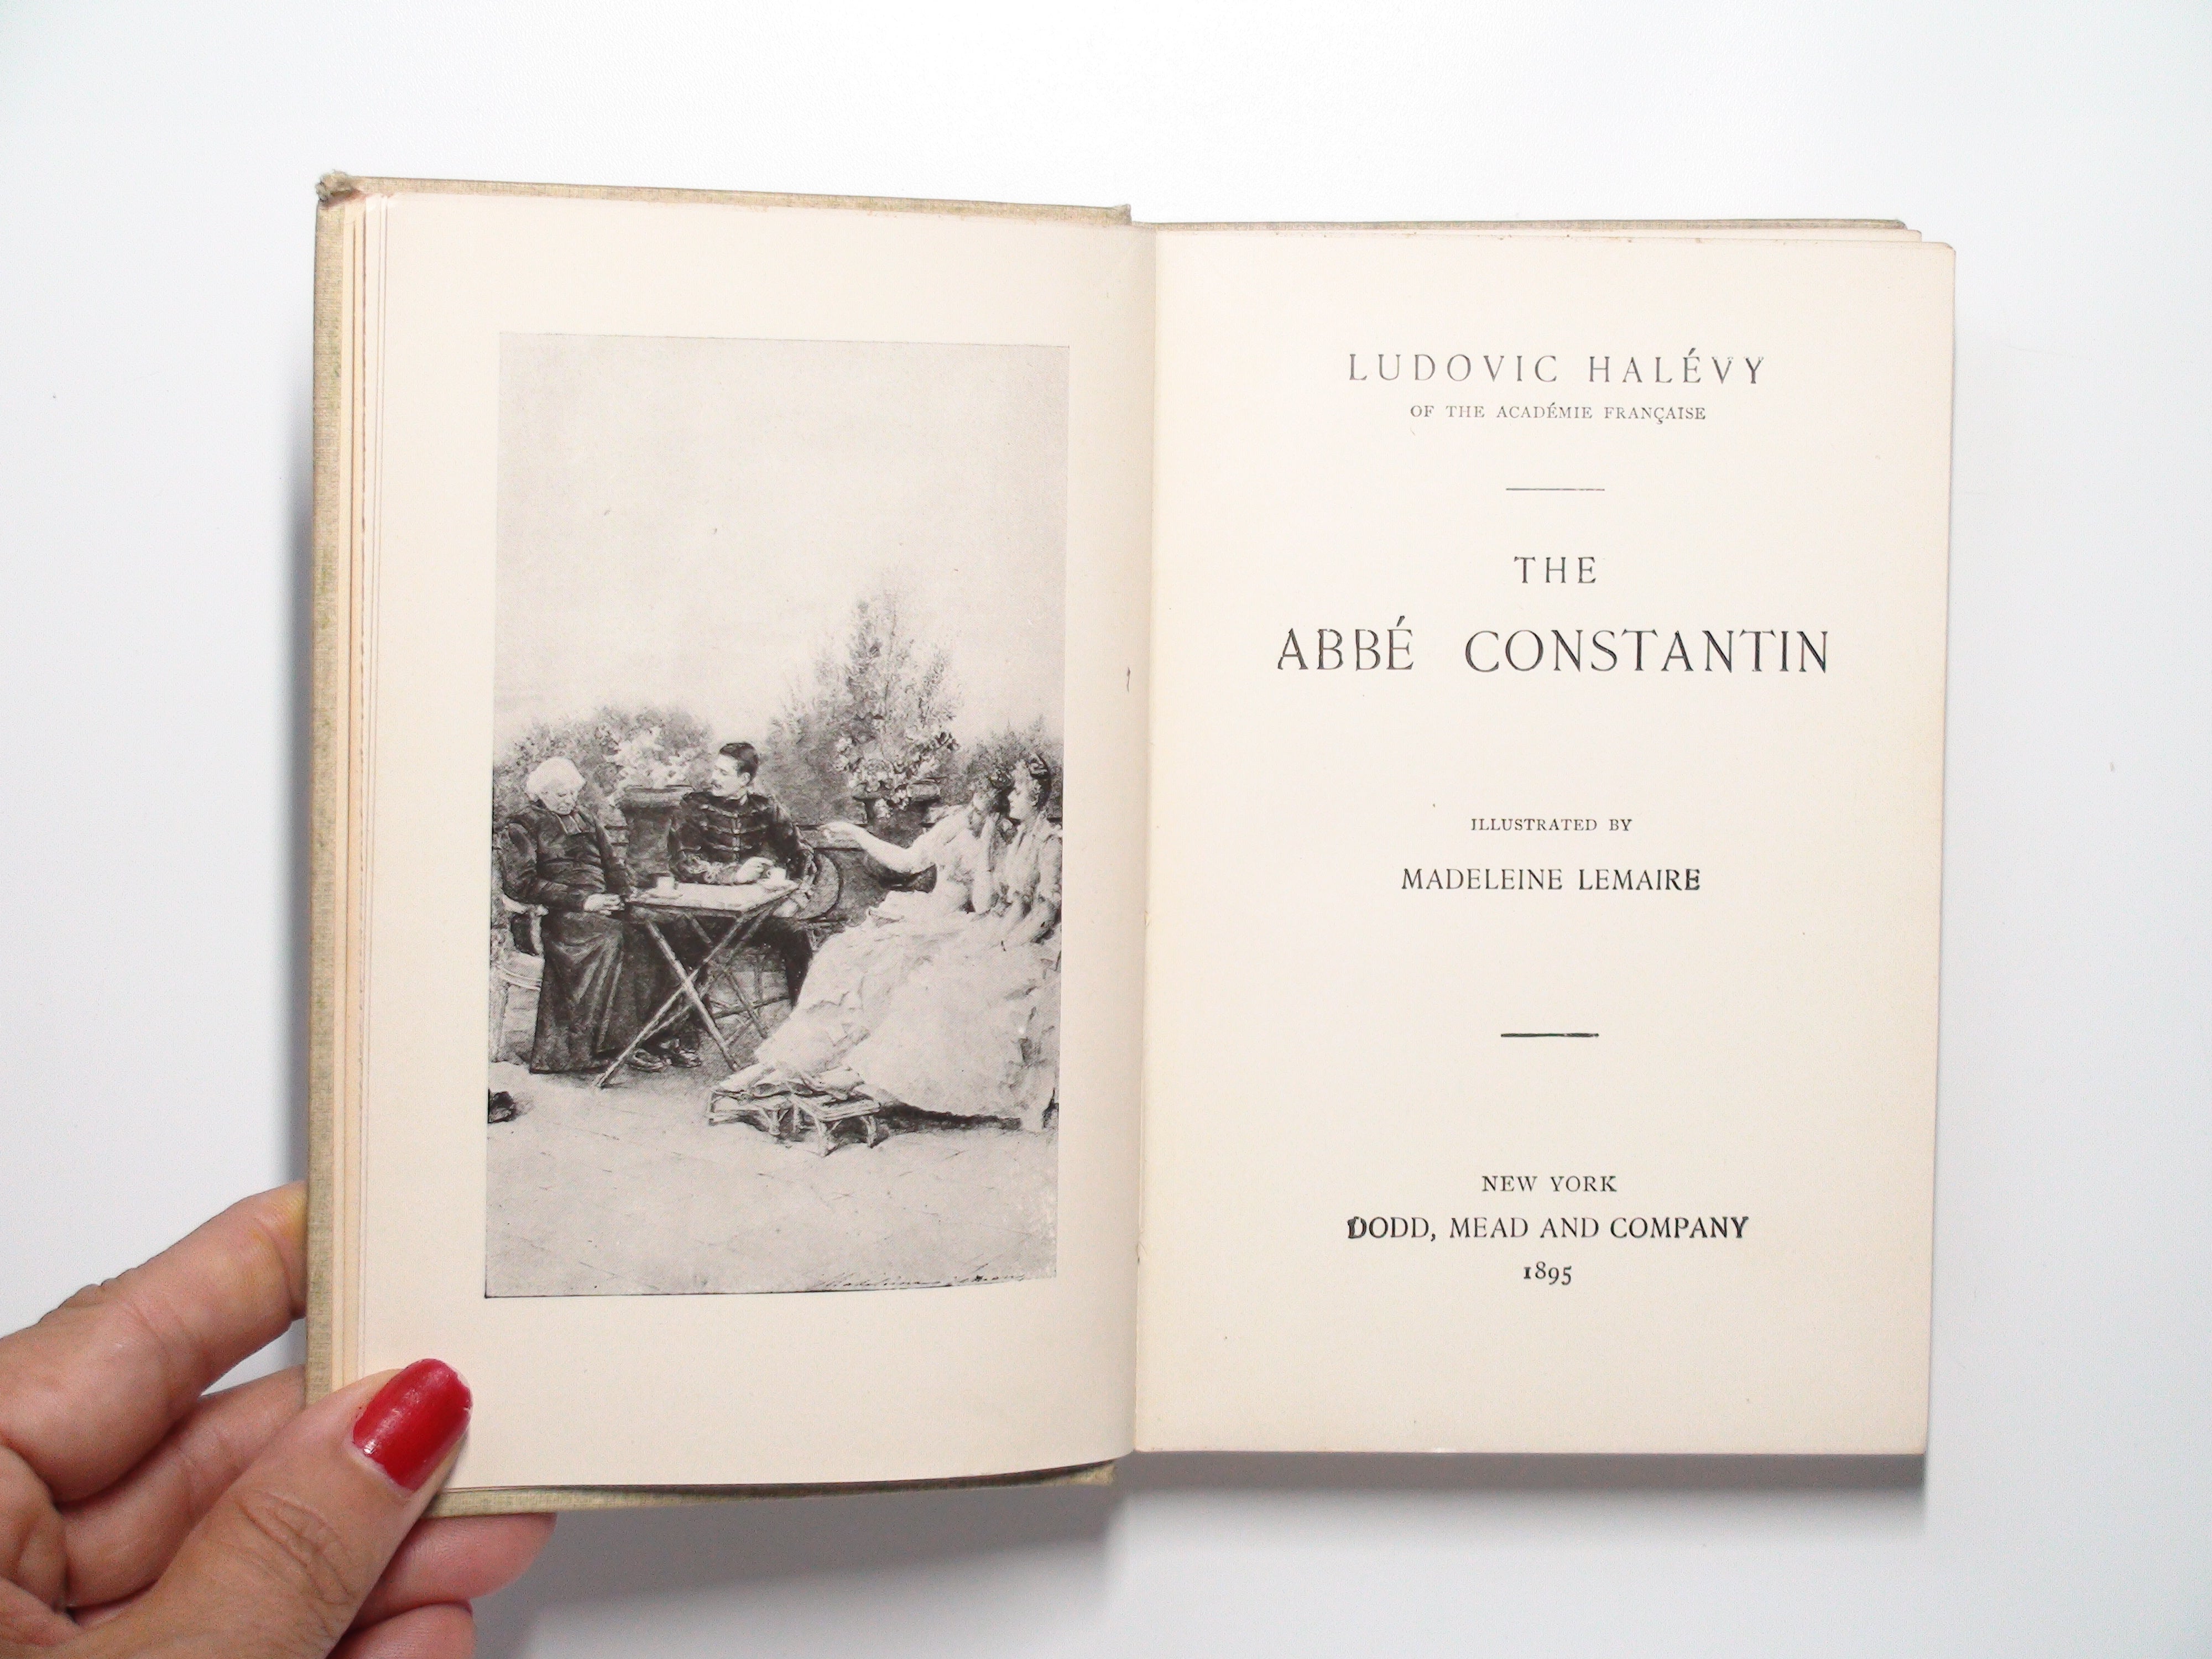 The Abbe Constantin, by Ludovic Halevy, Illustrated by Madeleine Lemaire, 1895